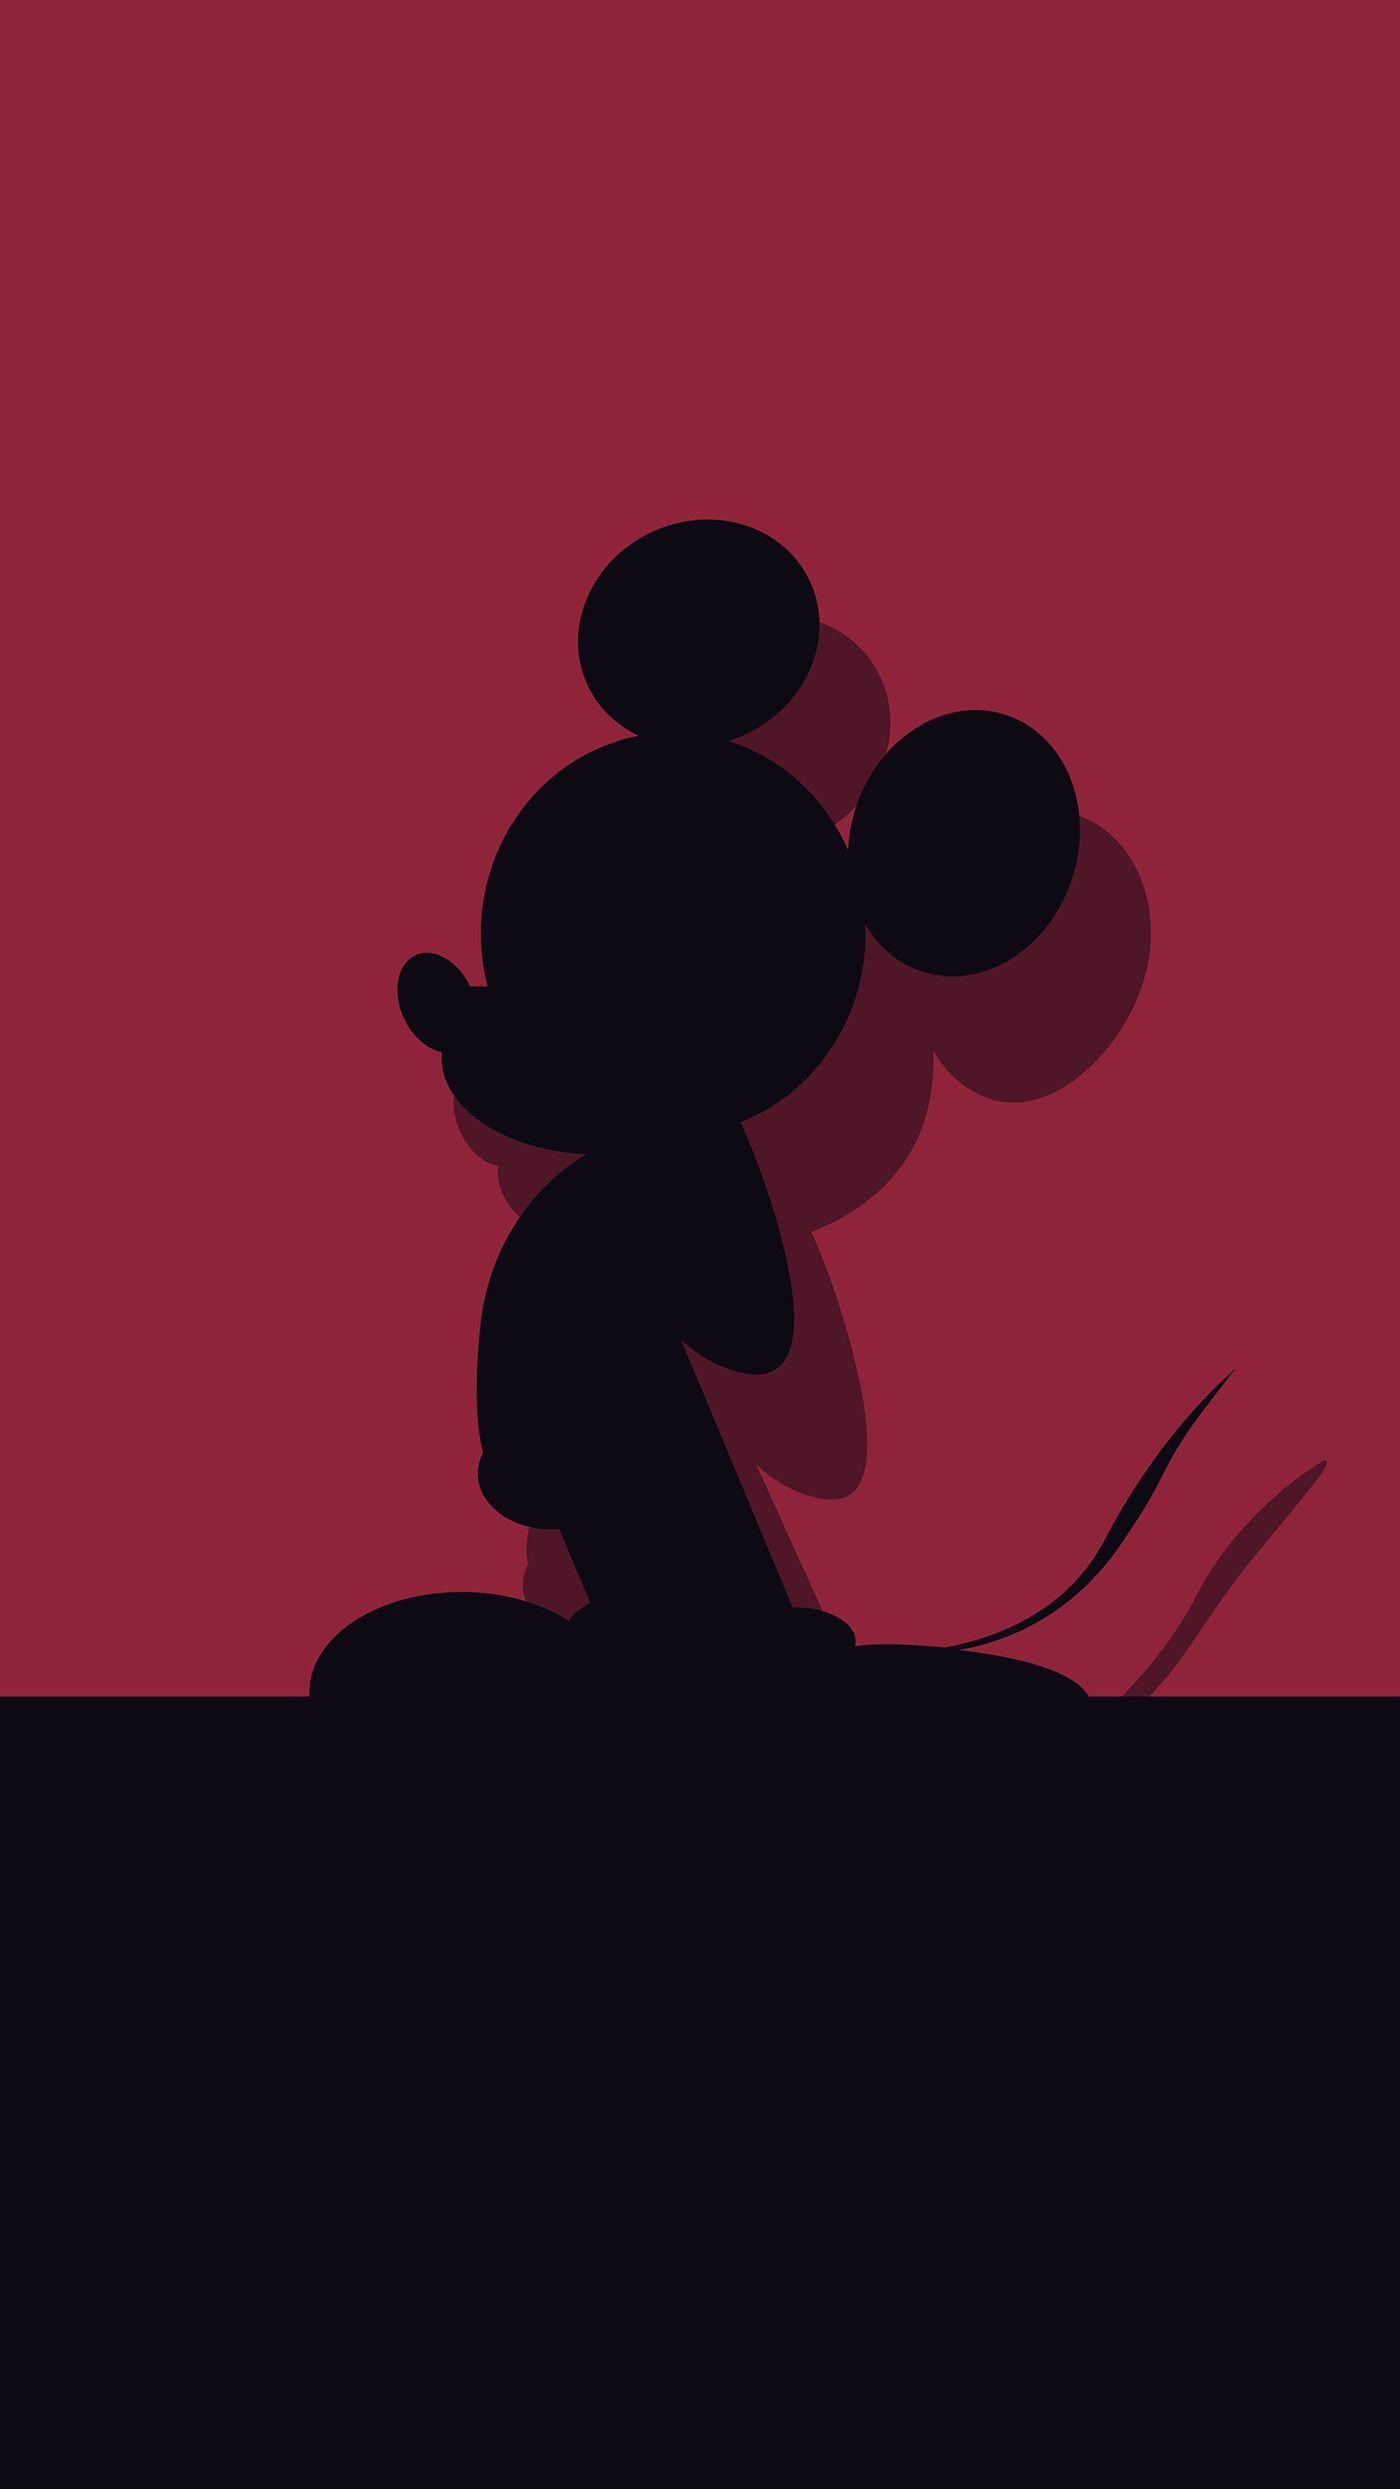 Mickey Mouse Aesthetic Wallpapers Wallpaper Cave Mickey mouse is an animated character created by walt disney and ub iwerks. mickey mouse aesthetic wallpapers